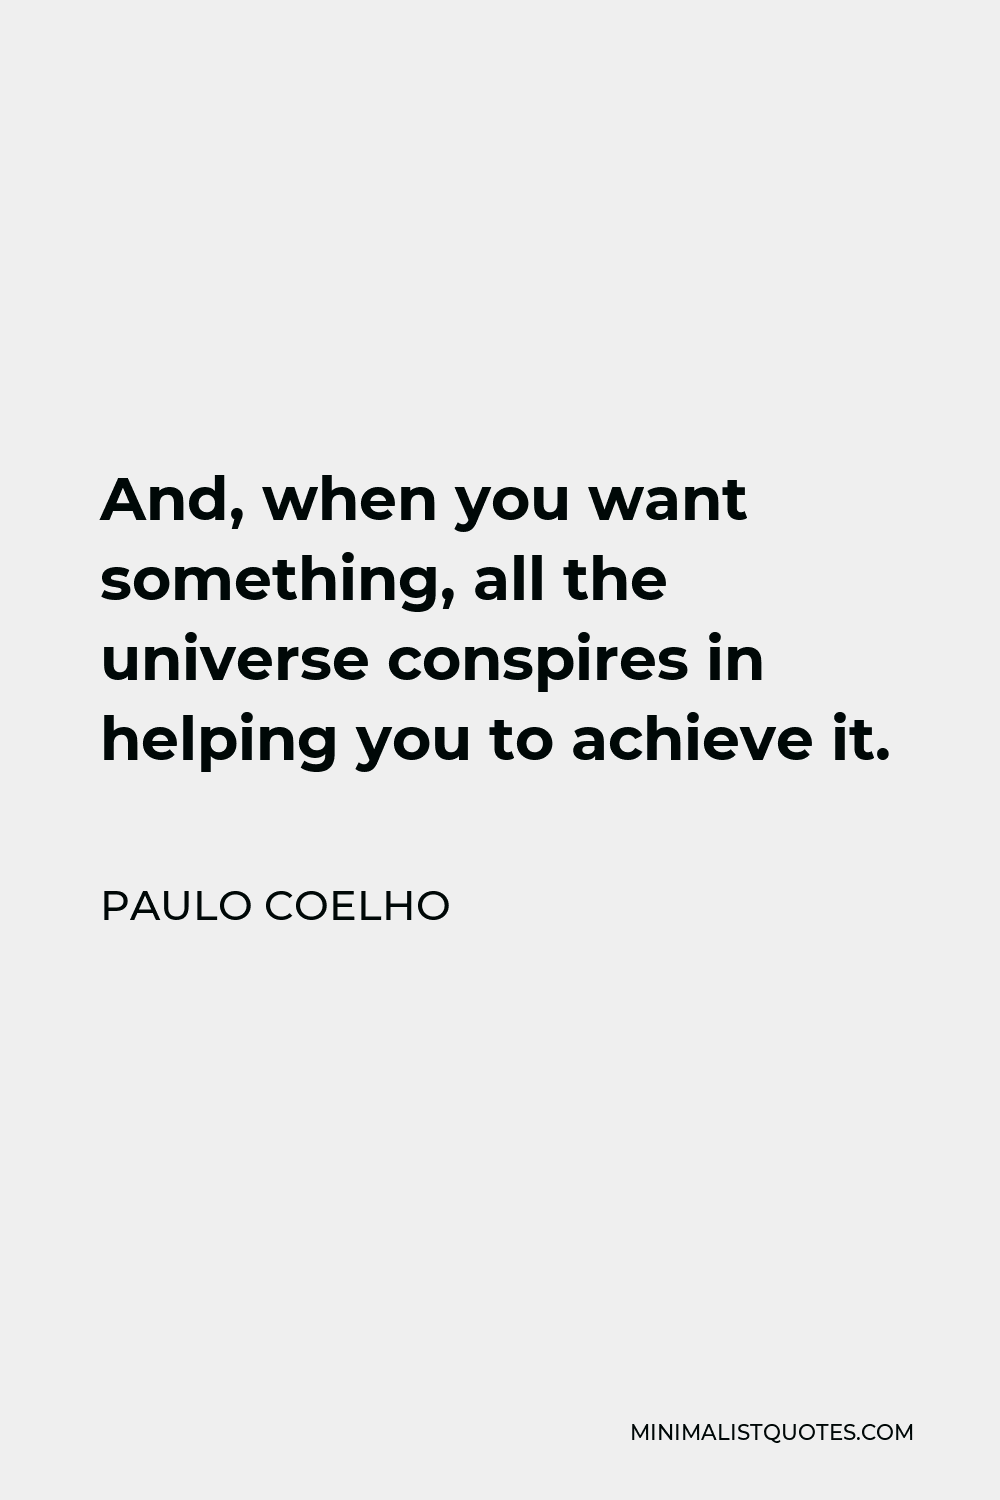 Paulo Coelho Quote - And, when you want something, all the universe conspires in helping you to achieve it.